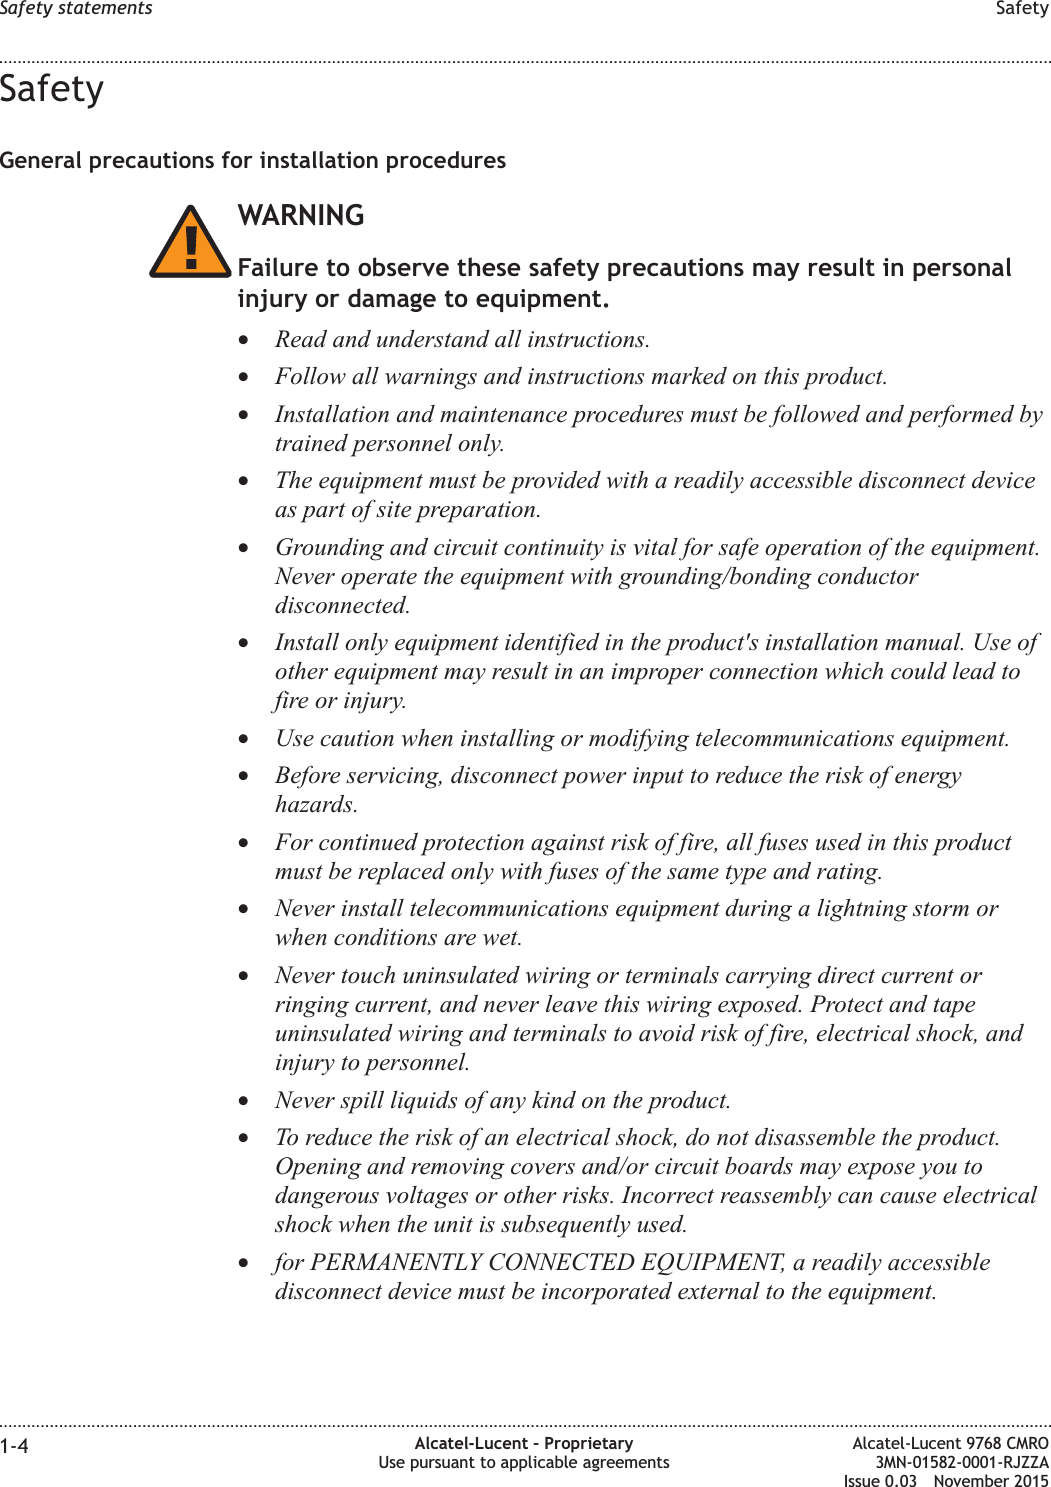 SafetyGeneral precautions for installation proceduresWARNINGFailure to observe these safety precautions may result in personalinjury or damage to equipment.•Read and understand all instructions.•Follow all warnings and instructions marked on this product.•Installation and maintenance procedures must be followed and performed bytrained personnel only.•The equipment must be provided with a readily accessible disconnect deviceas part of site preparation.•Grounding and circuit continuity is vital for safe operation of the equipment.Never operate the equipment with grounding/bonding conductordisconnected.•Install only equipment identified in the product&apos;s installation manual. Use ofother equipment may result in an improper connection which could lead tofire or injury.•Use caution when installing or modifying telecommunications equipment.•Before servicing, disconnect power input to reduce the risk of energyhazards.•For continued protection against risk of fire, all fuses used in this productmust be replaced only with fuses of the same type and rating.•Never install telecommunications equipment during a lightning storm orwhen conditions are wet.•Never touch uninsulated wiring or terminals carrying direct current orringing current, and never leave this wiring exposed. Protect and tapeuninsulated wiring and terminals to avoid risk of fire, electrical shock, andinjury to personnel.•Never spill liquids of any kind on the product.•To reduce the risk of an electrical shock, do not disassemble the product.Opening and removing covers and/or circuit boards may expose you todangerous voltages or other risks. Incorrect reassembly can cause electricalshock when the unit is subsequently used.•for PERMANENTLY CONNECTED EQUIPMENT, a readily accessibledisconnect device must be incorporated external to the equipment.Safety statements Safety........................................................................................................................................................................................................................................................................................................................................................................................................................................................................1-4 Alcatel-Lucent – ProprietaryUse pursuant to applicable agreementsAlcatel-Lucent 9768 CMRO3MN-01582-0001-RJZZAIssue 0.03 November 2015DRAFTDRAFT